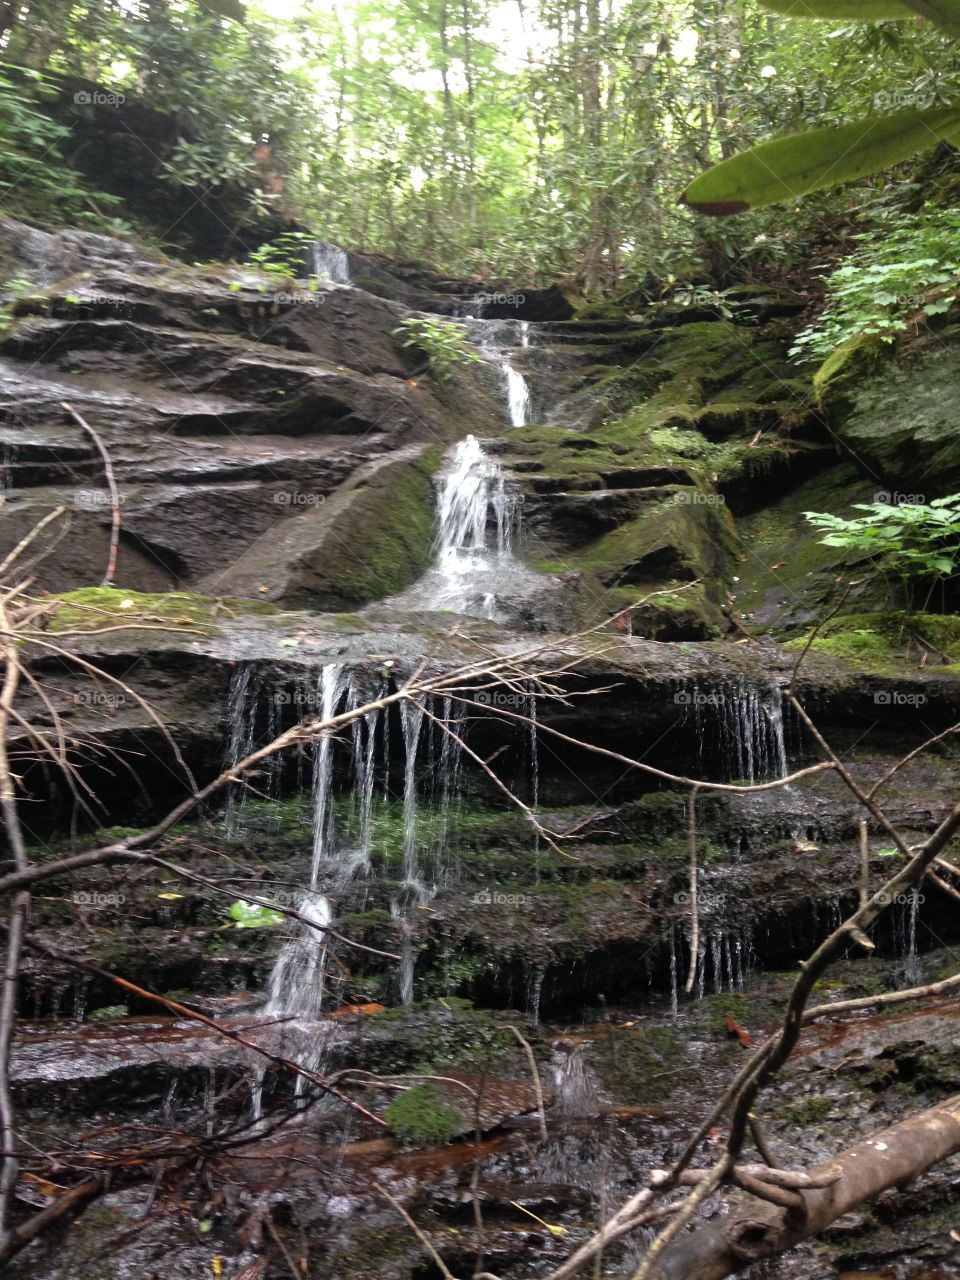 Waterfall in the Woods. Found this while hiking. 